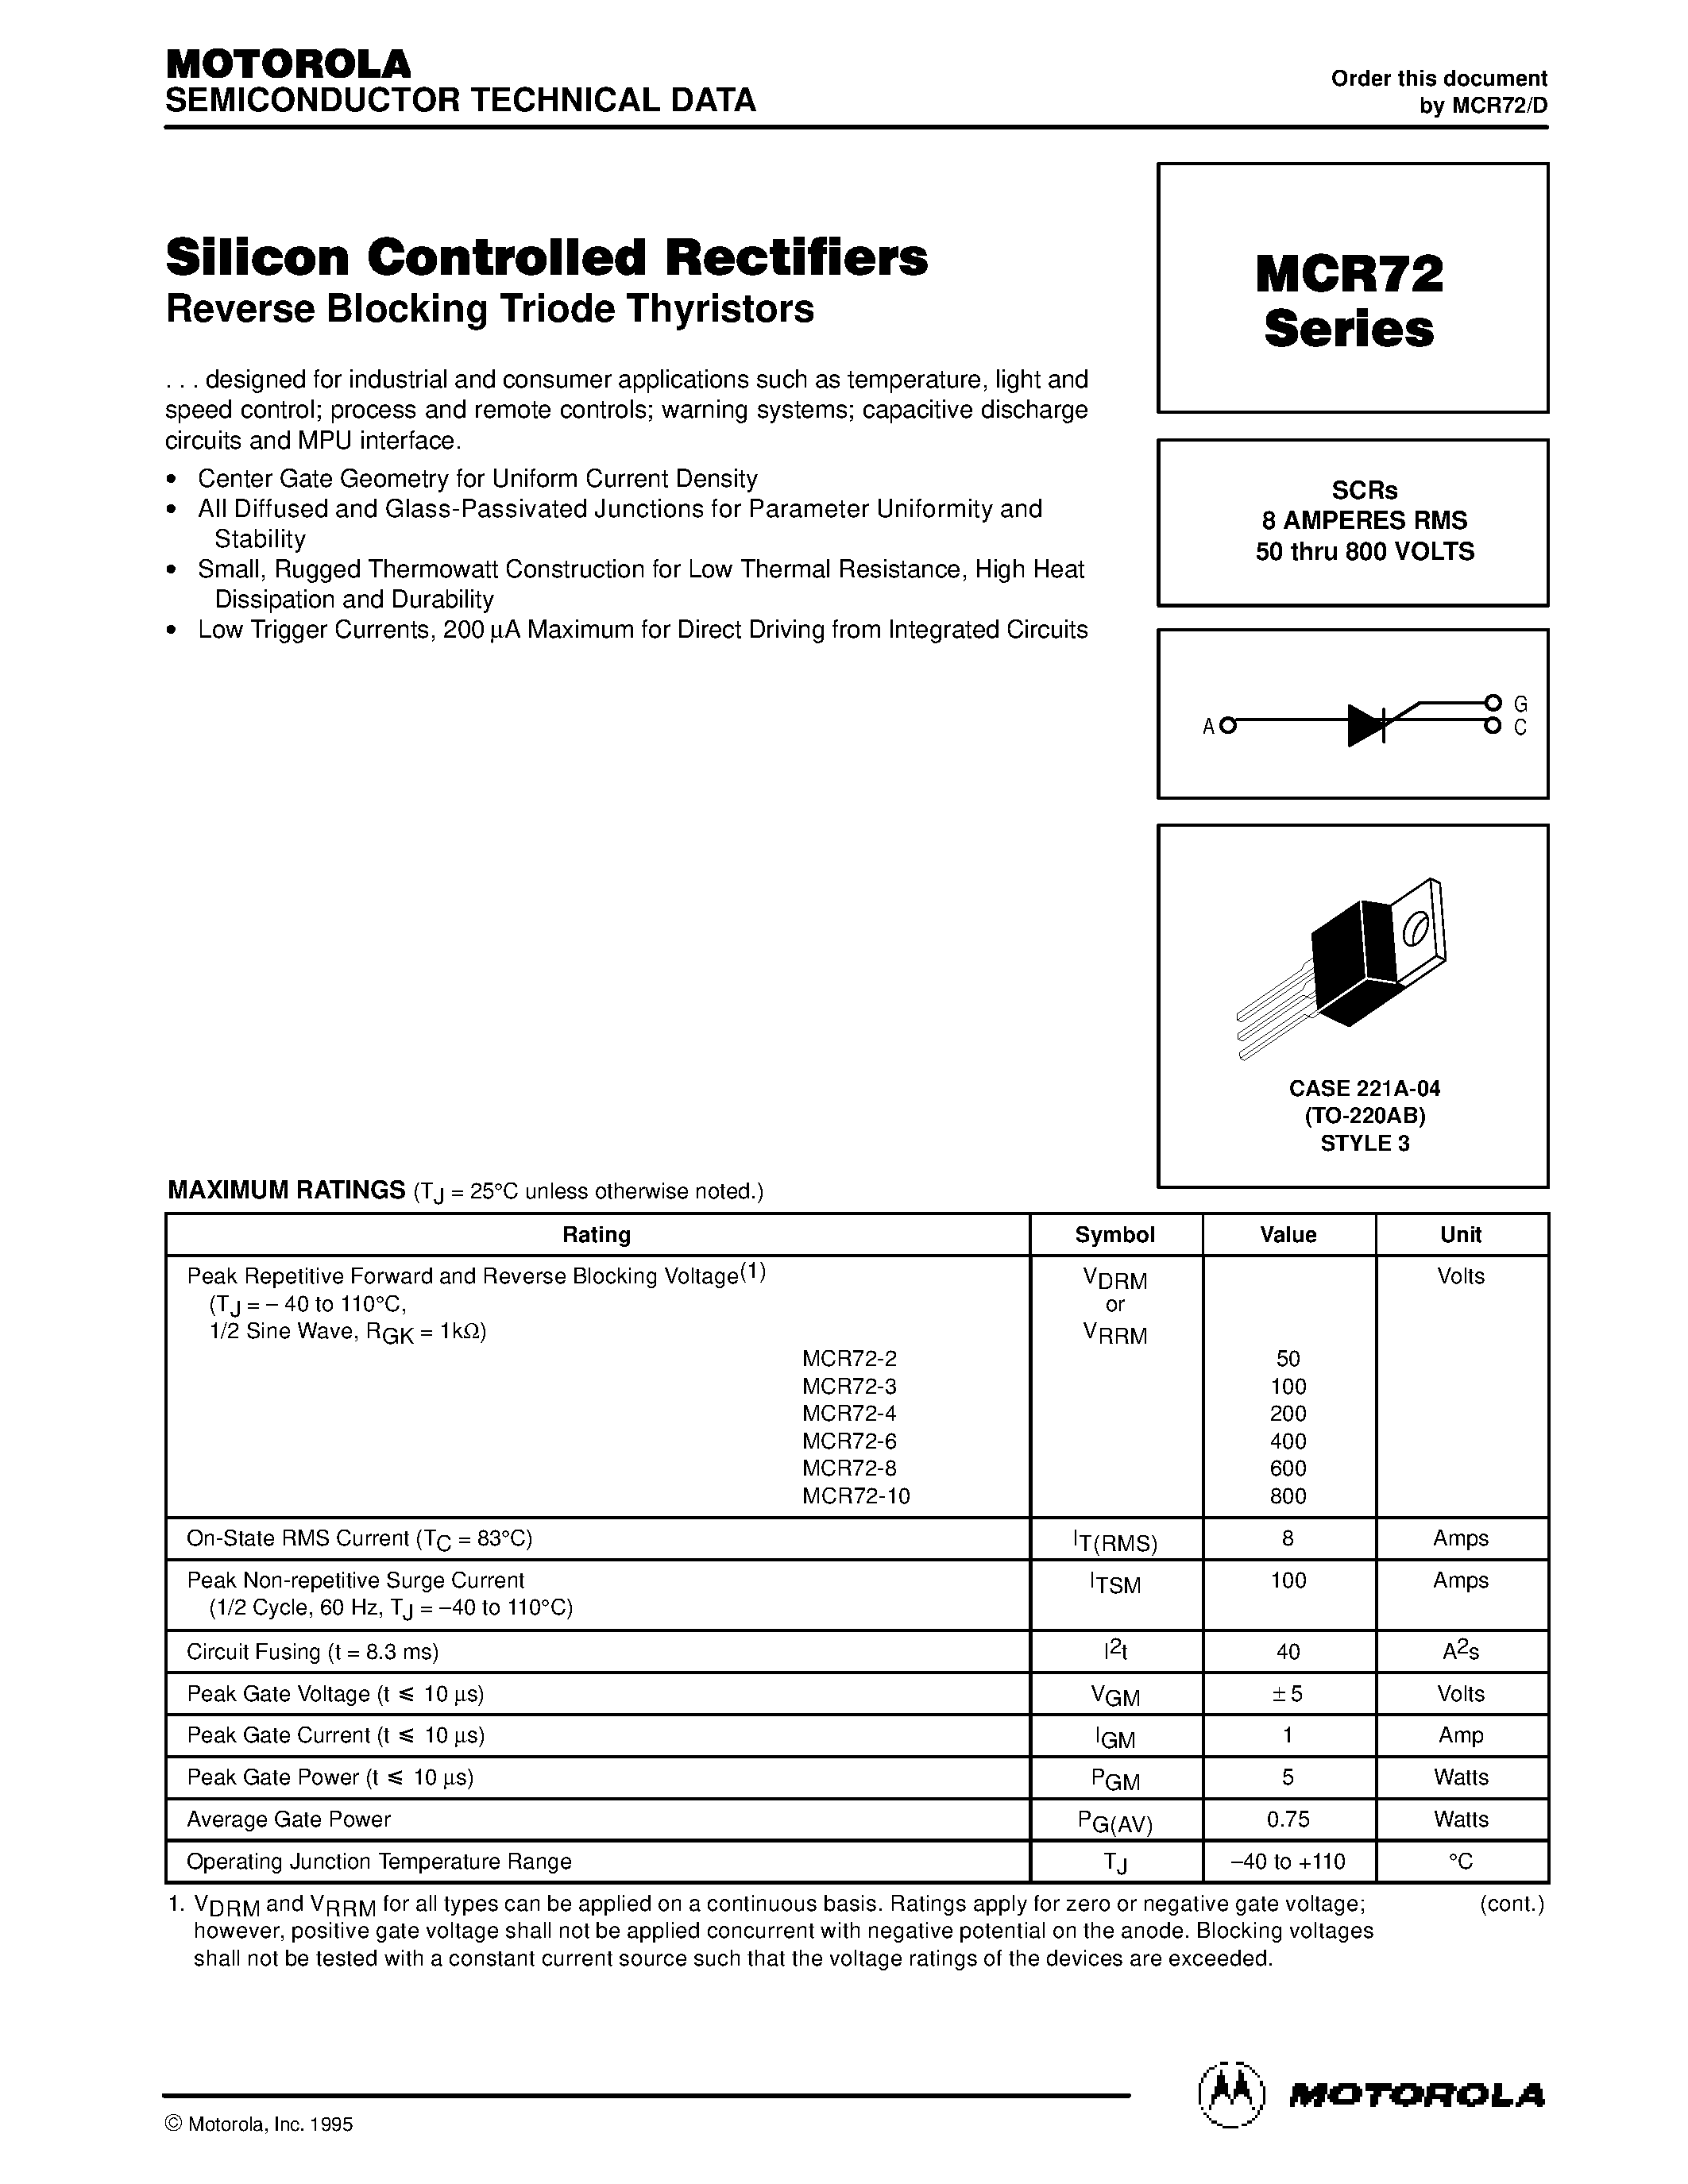 Datasheet MCR72 - Silicon Controlled Rectifiers page 1